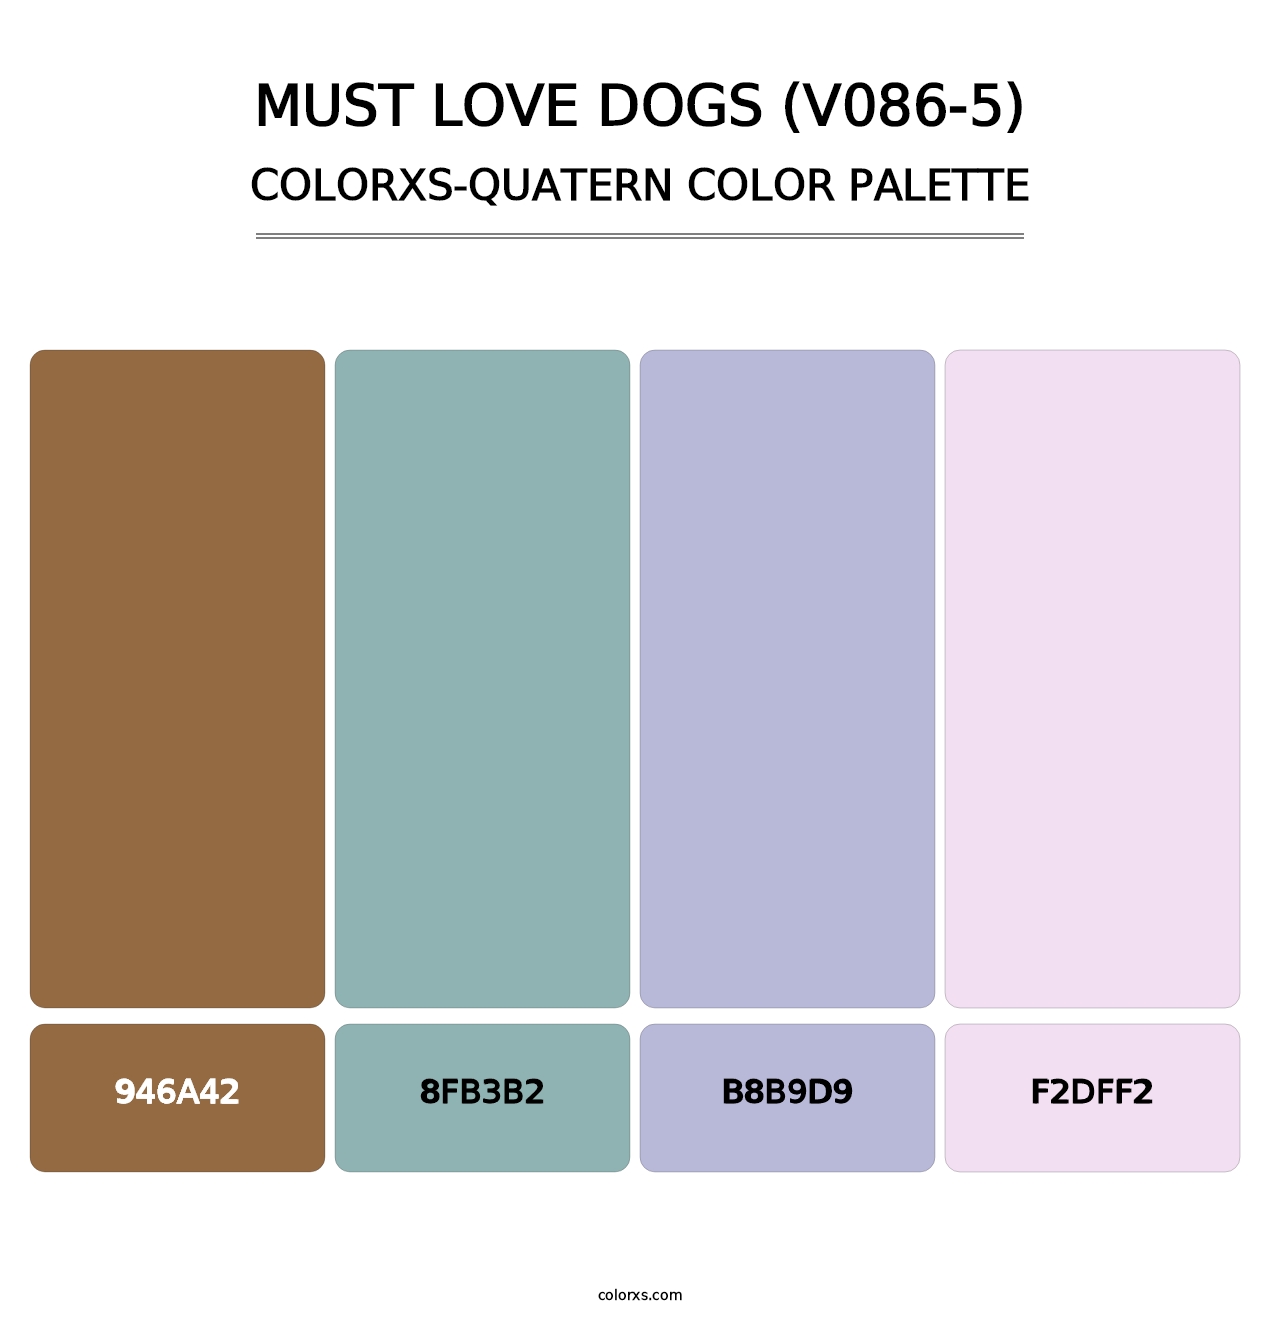 Must Love Dogs (V086-5) - Colorxs Quatern Palette